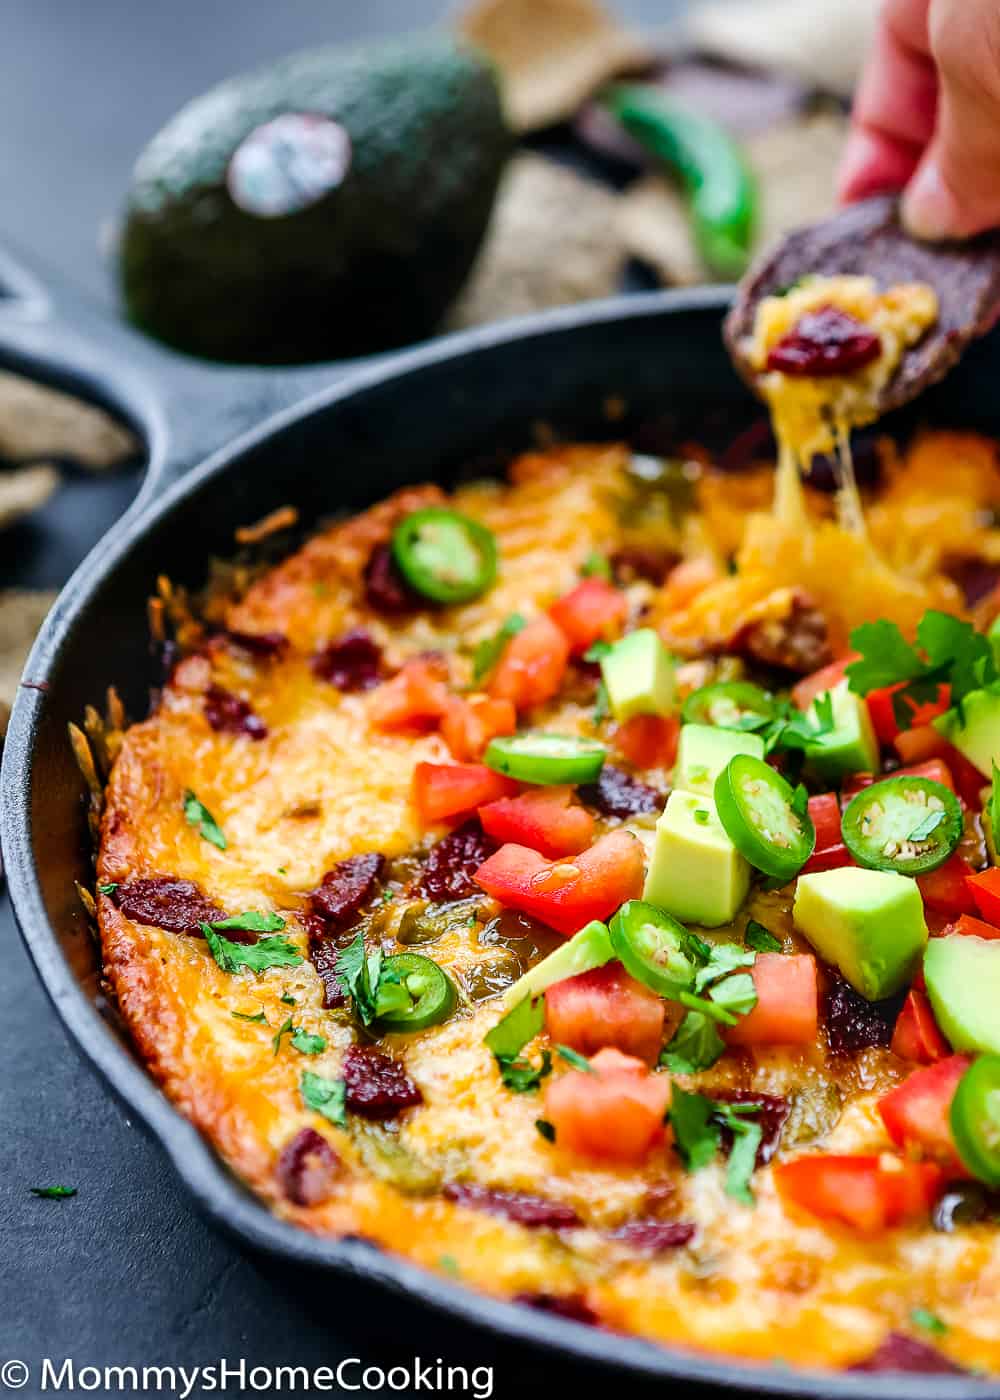 Easy Queso Fundido with Chorizo and Avocado - Mommy's Home Cooking